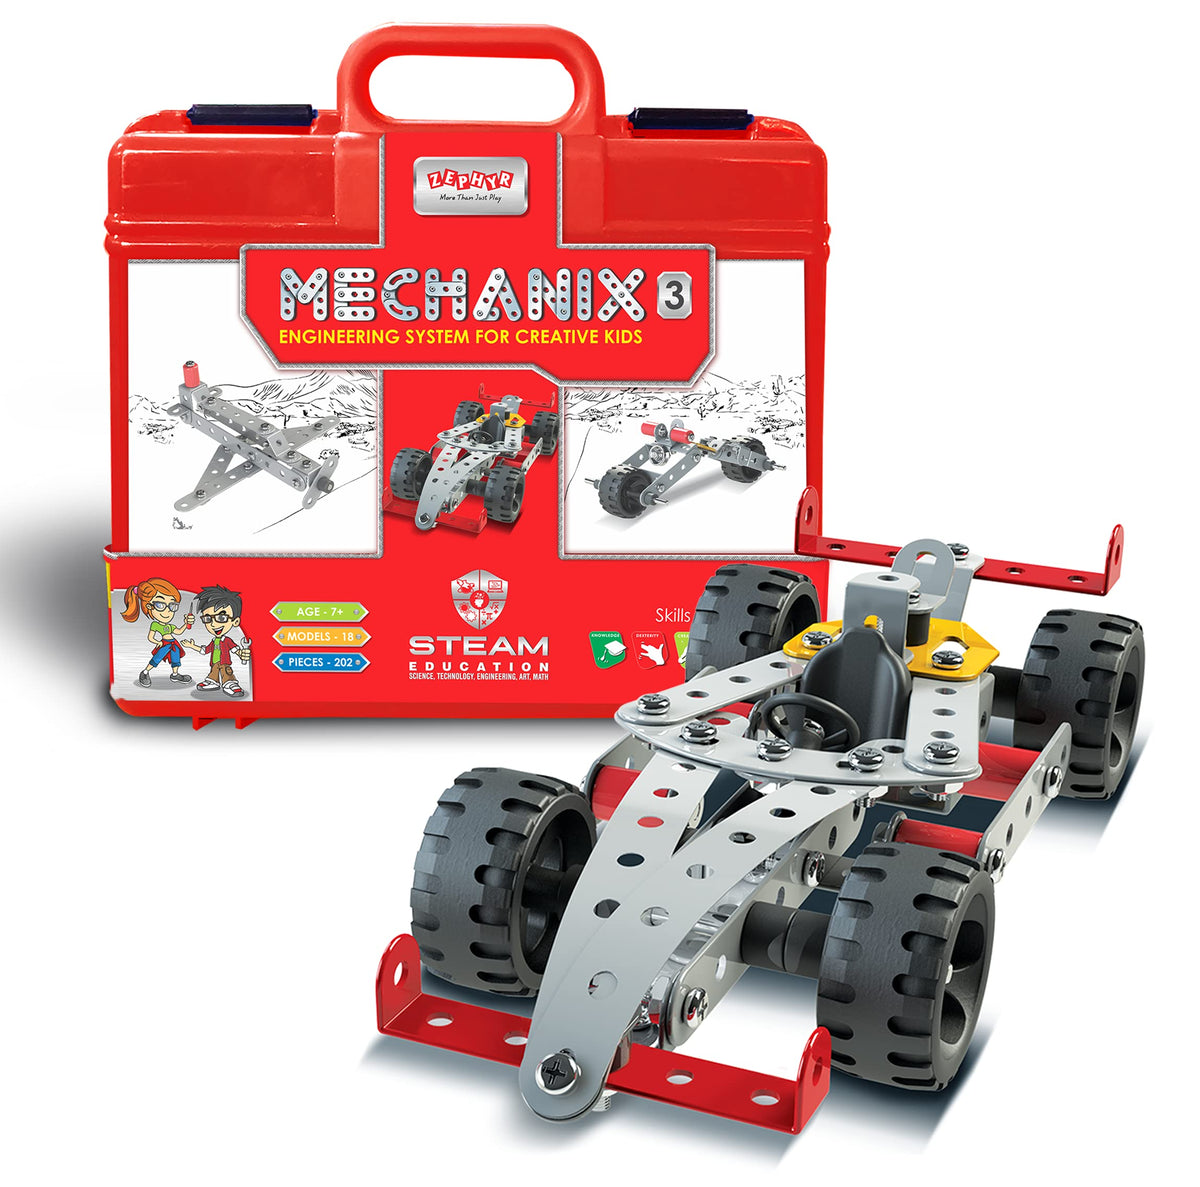 Mechanix-3 Smart Bag DIY STEM Toy, Building Construction Set for Boys and Girls Age 7+ (Special Edition)